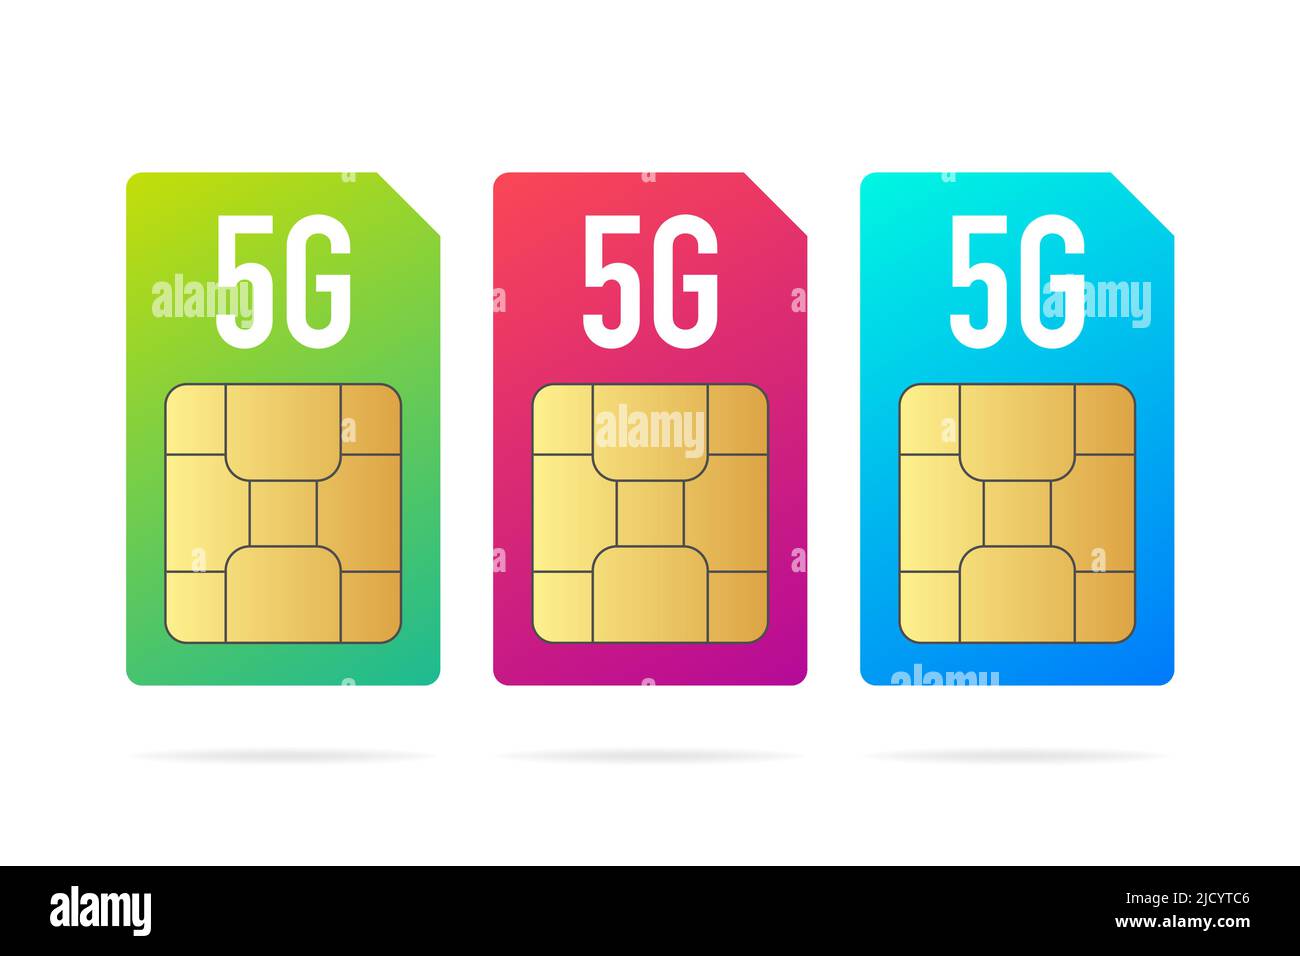 Sim card number Stock Vector Images - Alamy